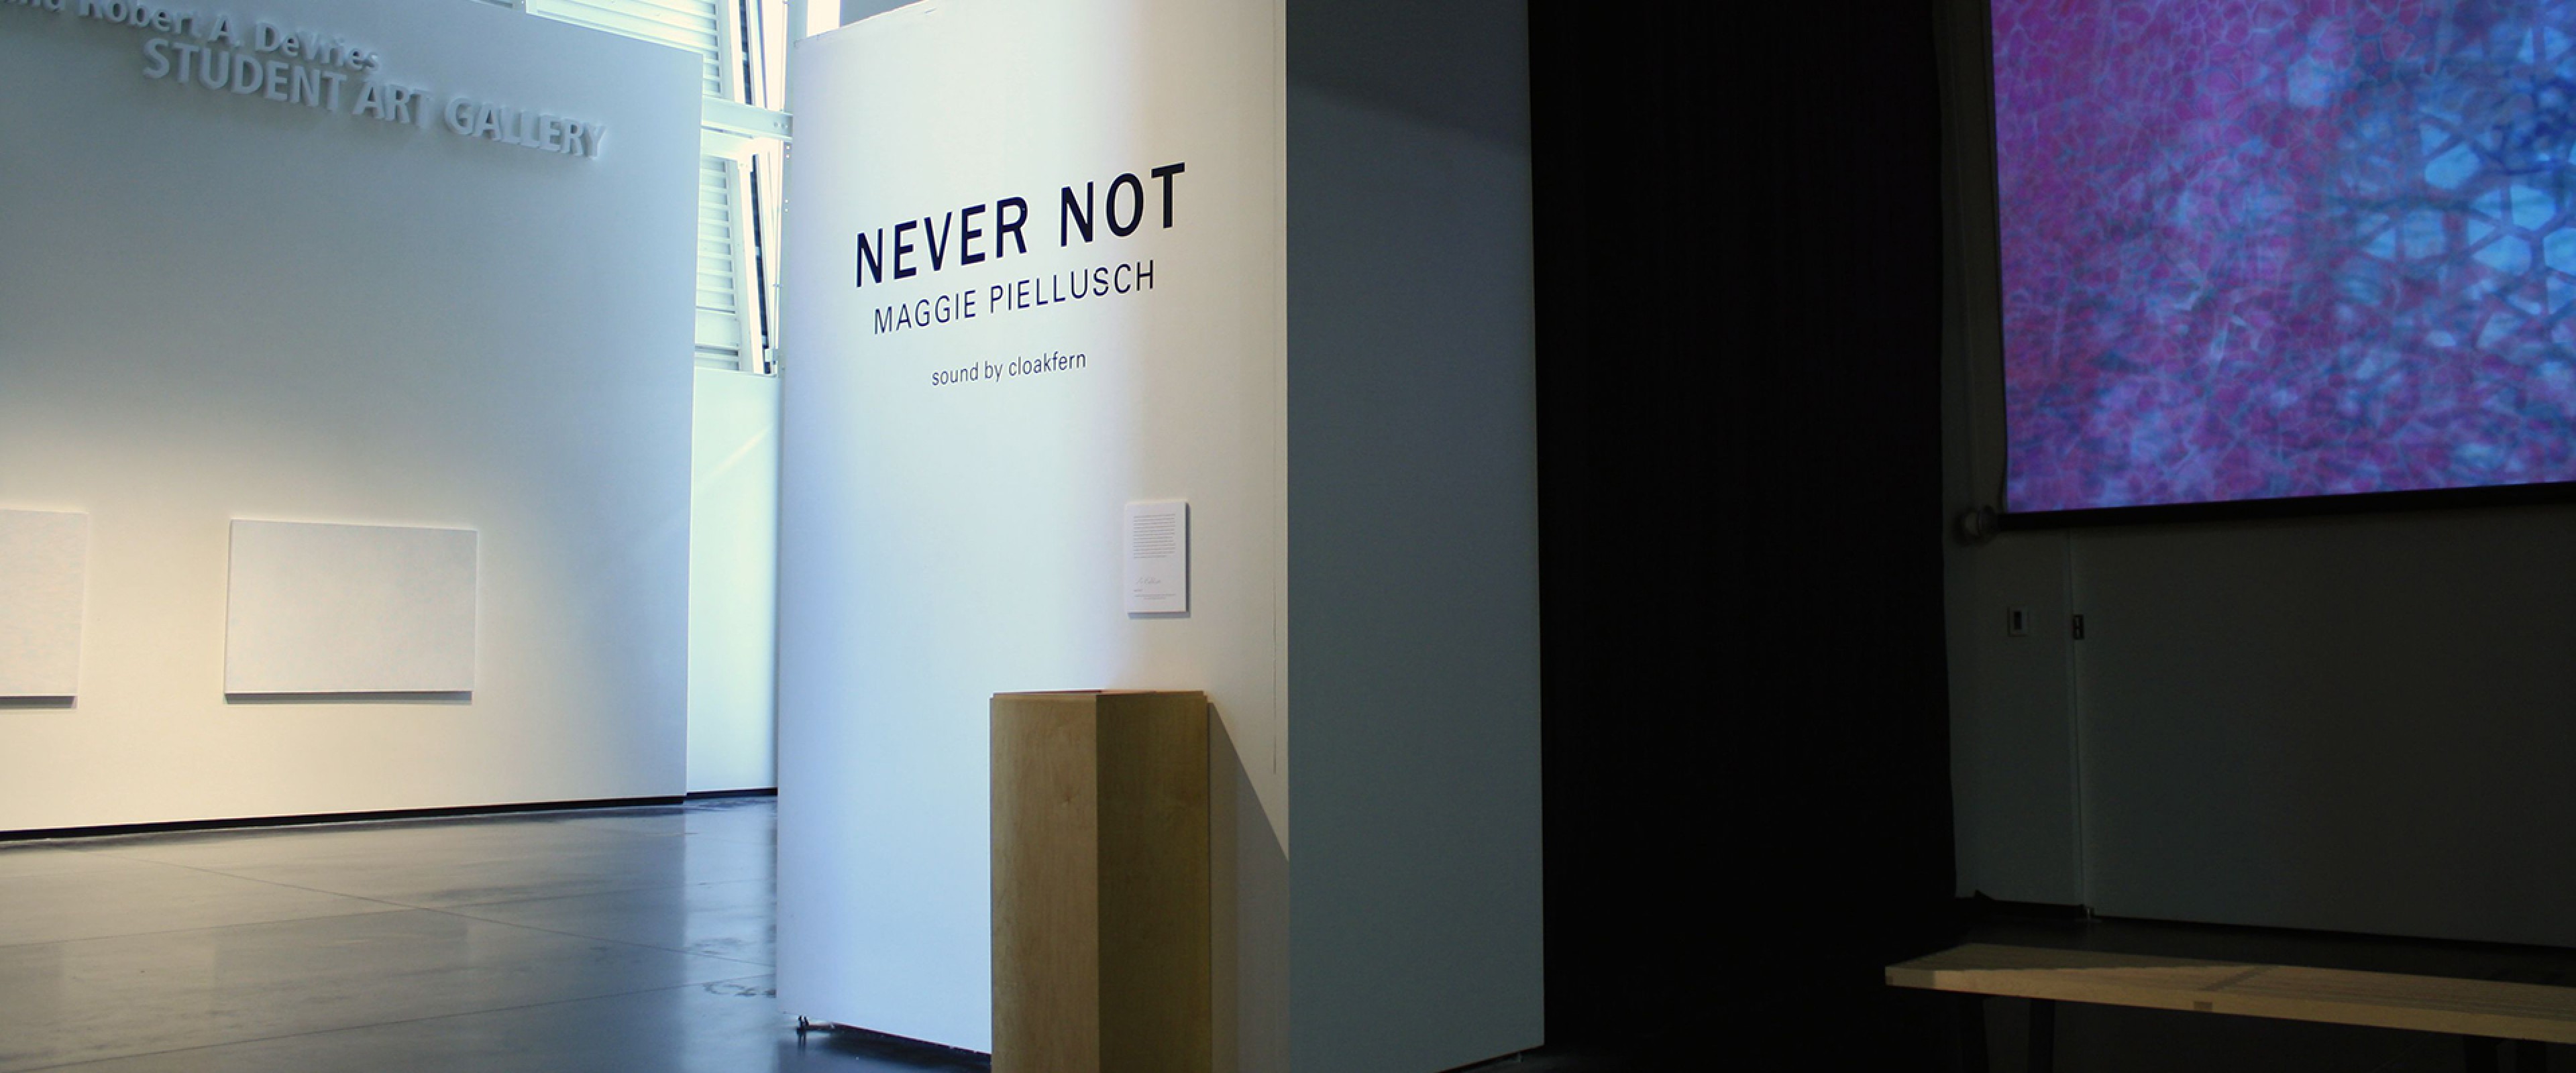 outside the "never not" exhibition